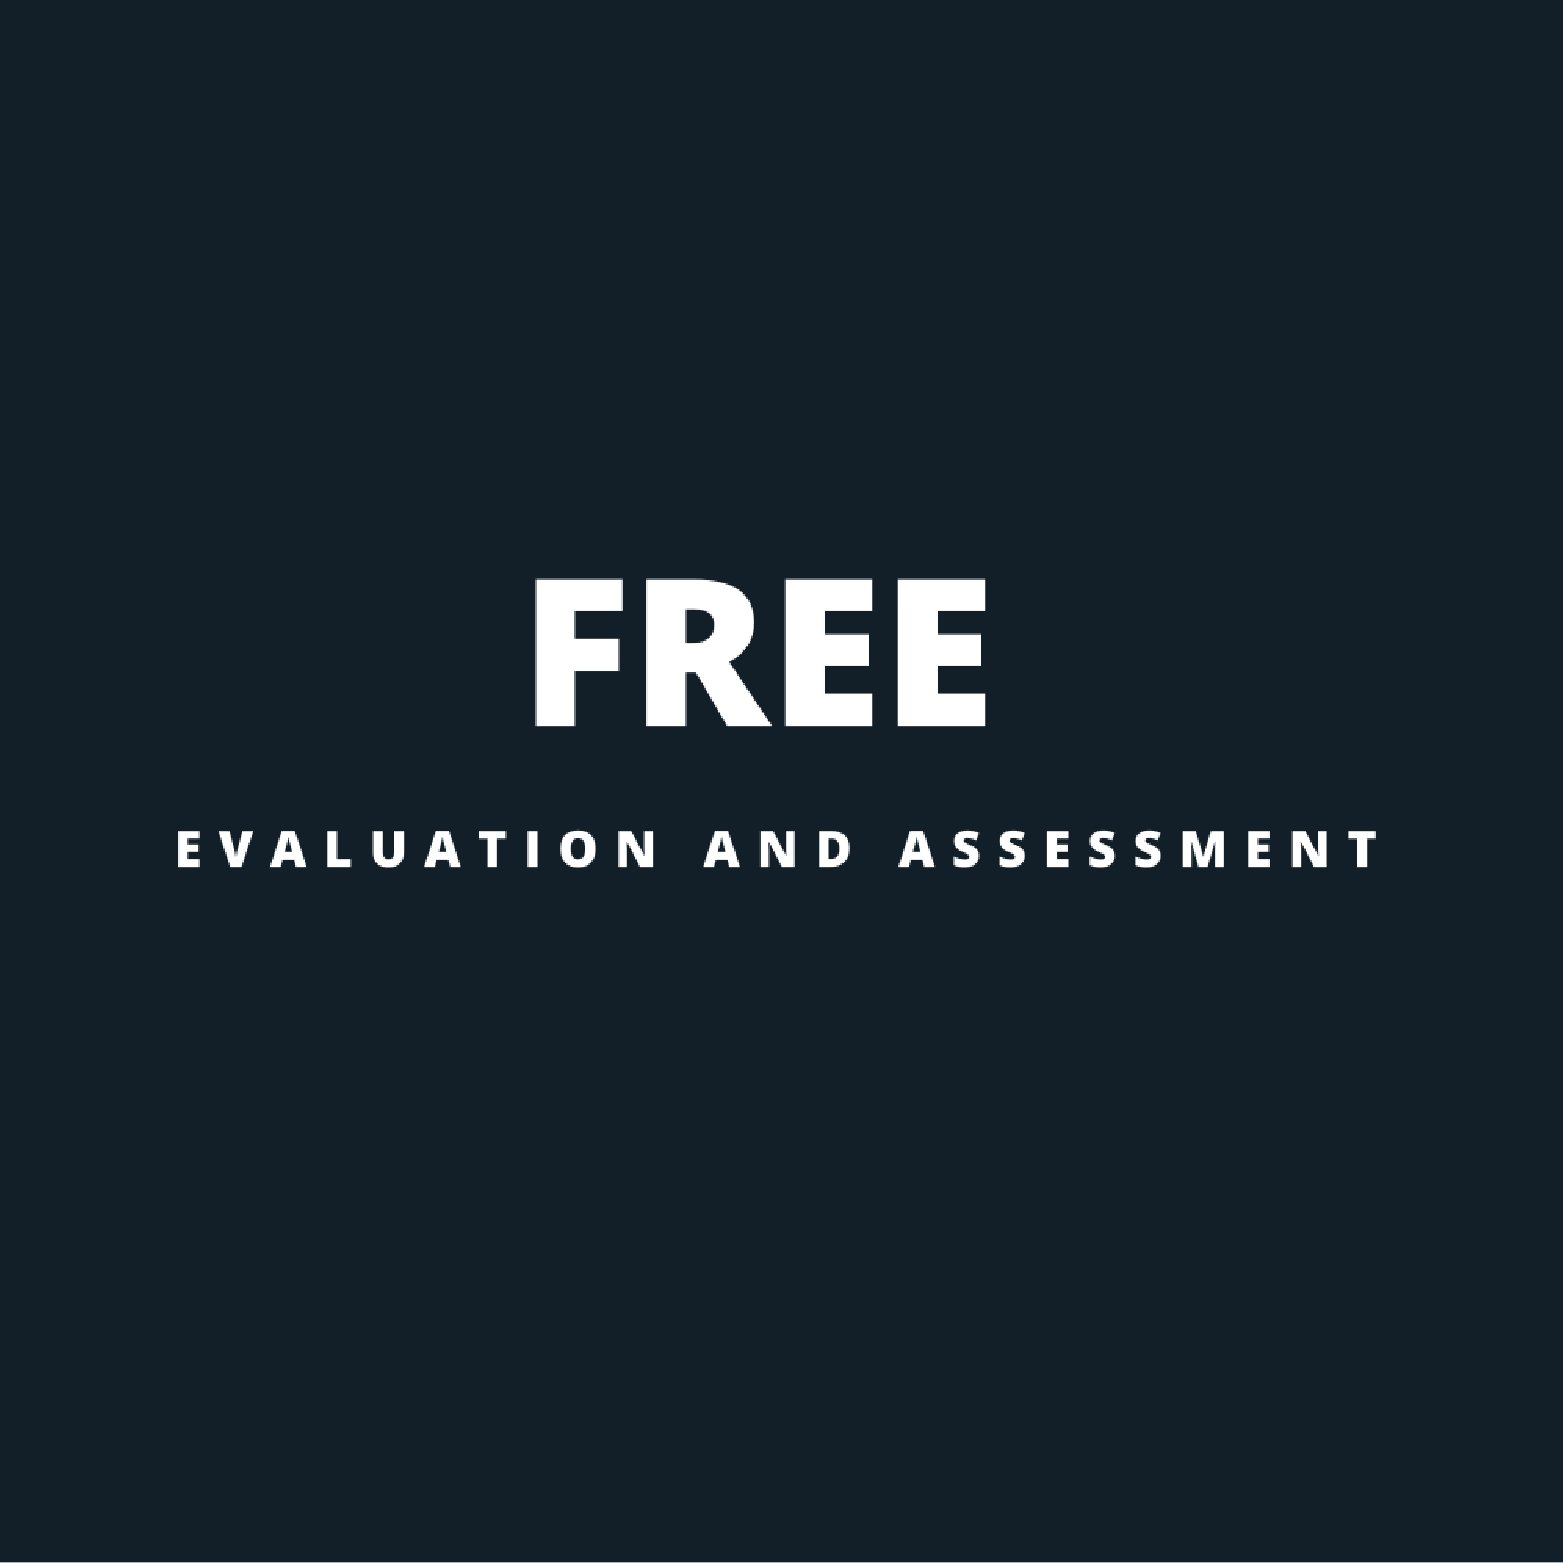 Free evaluation and assessment